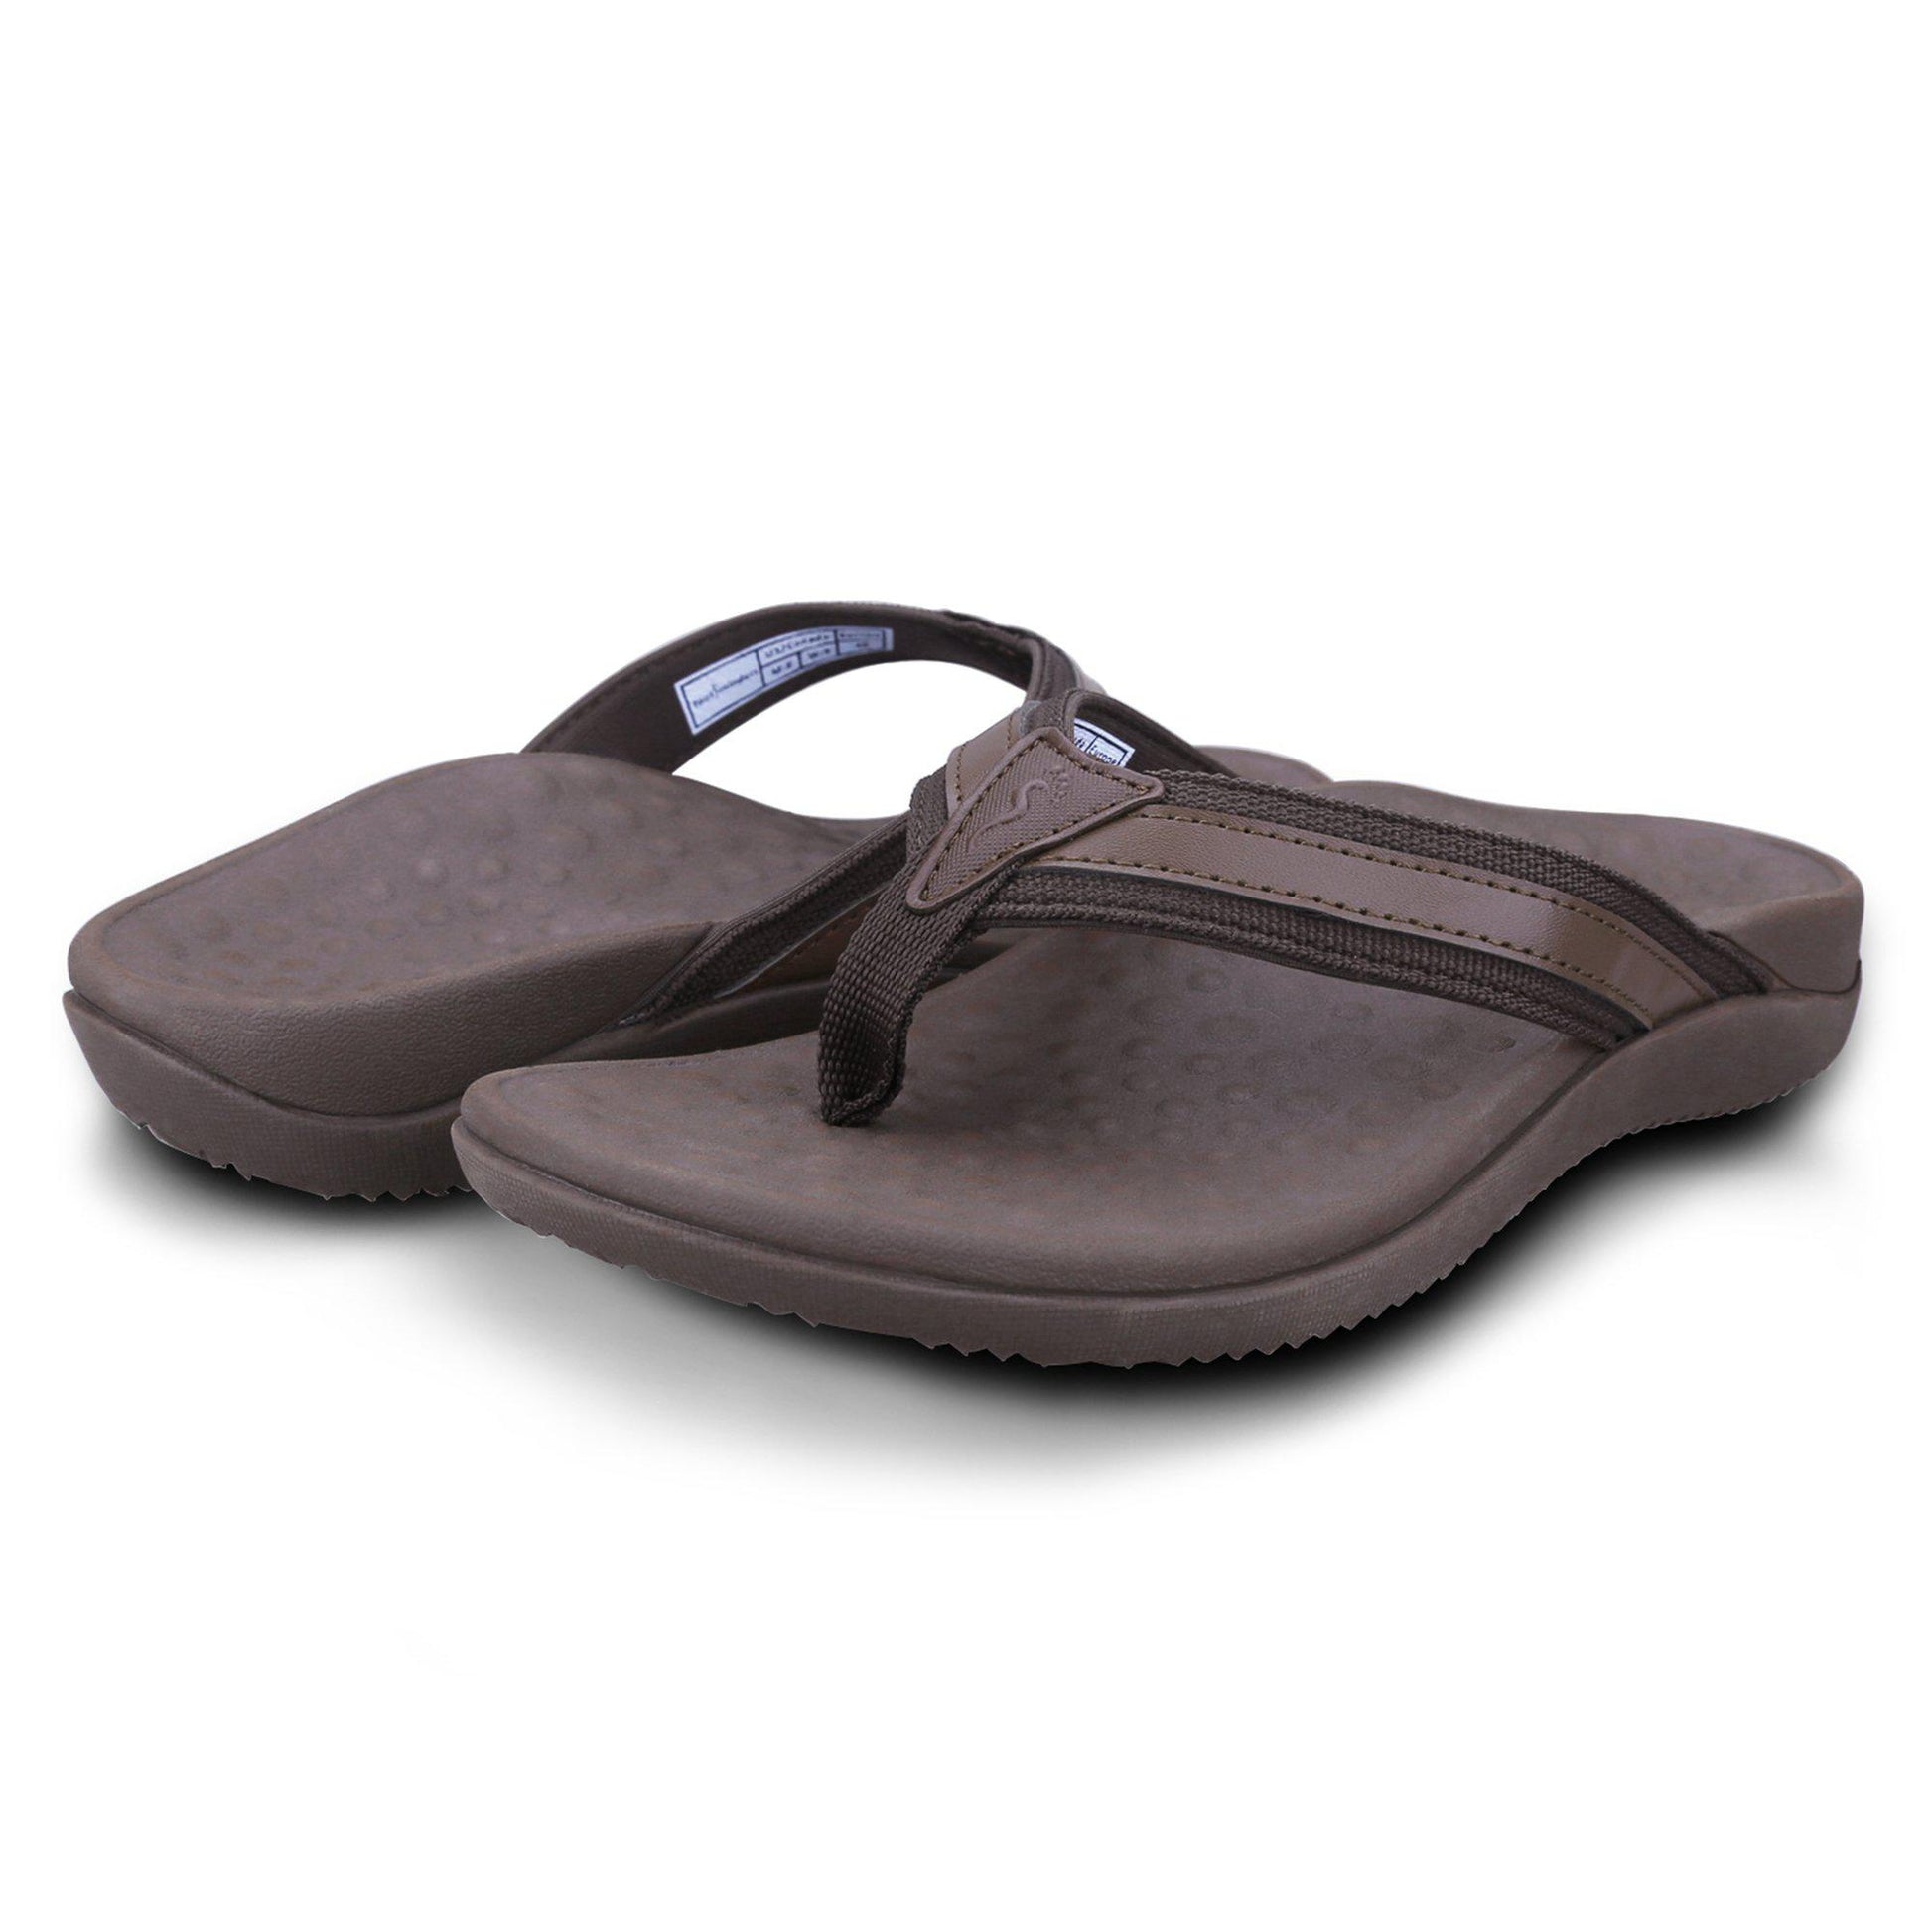 Cocoa Brown Orthotic Sandals  Arch Support Flip-Flops for Men and Women